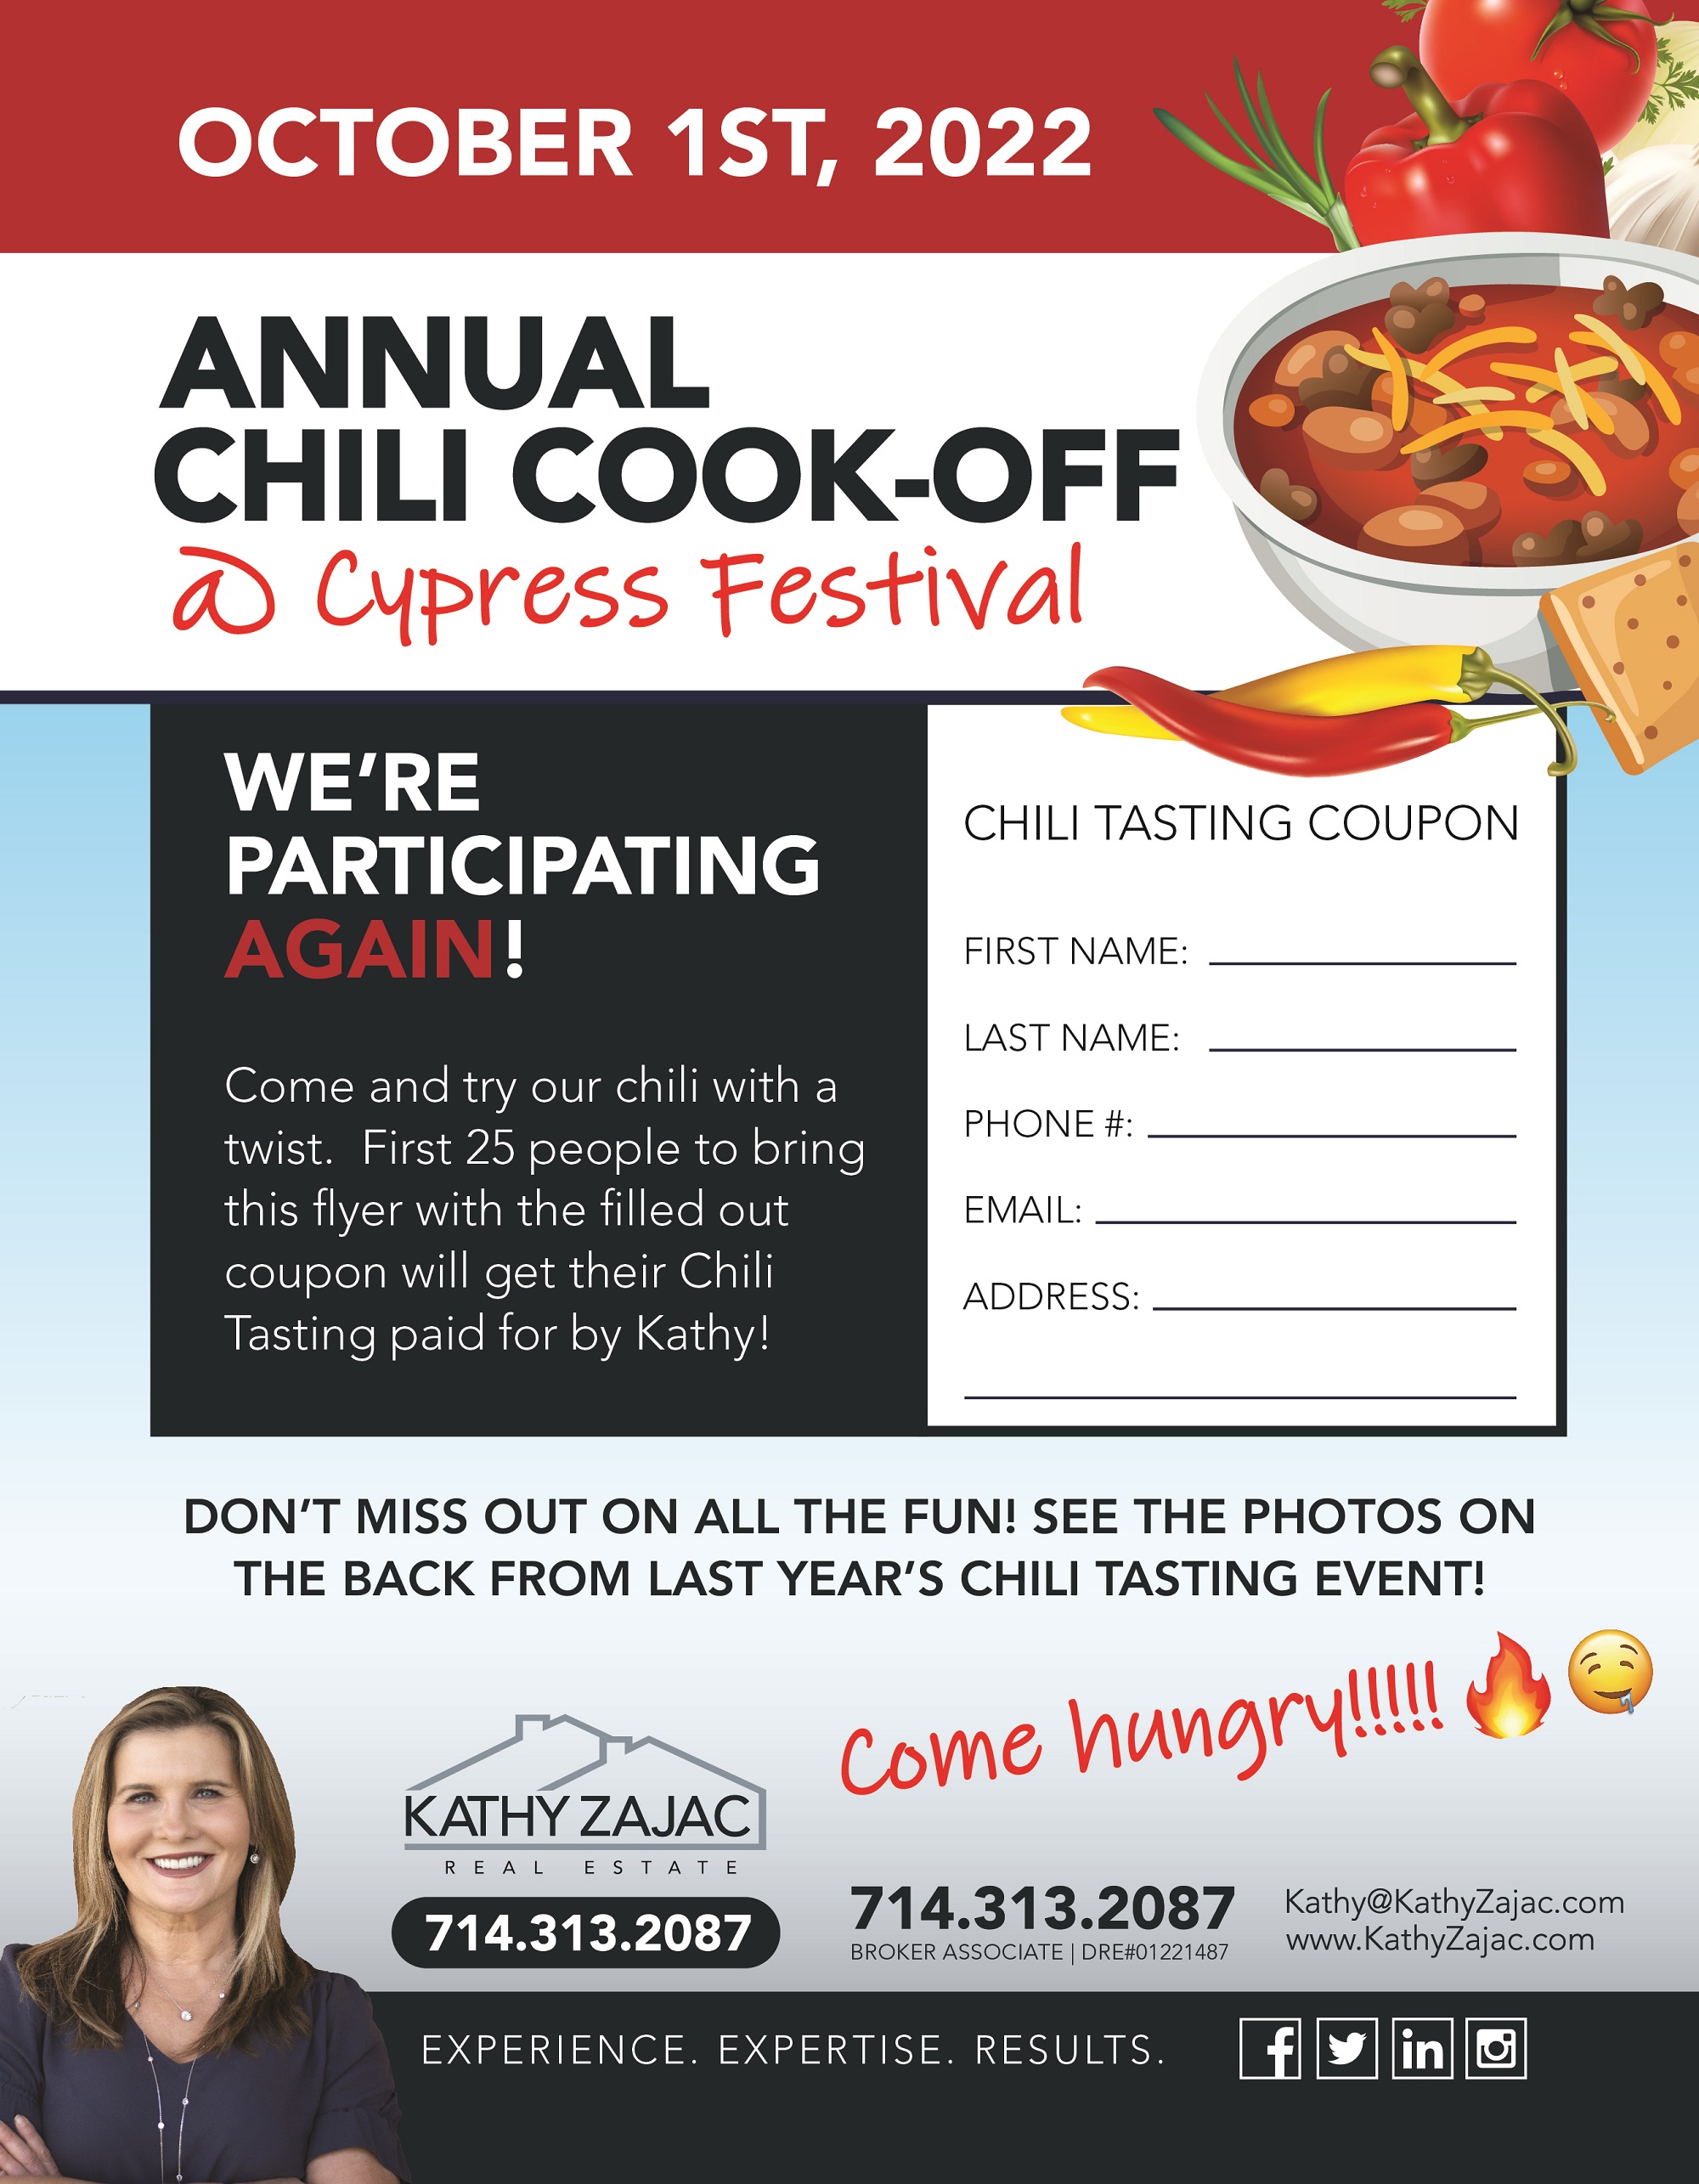 Annual Chili CookOff at Cypress Community Festival October 1st, 2022